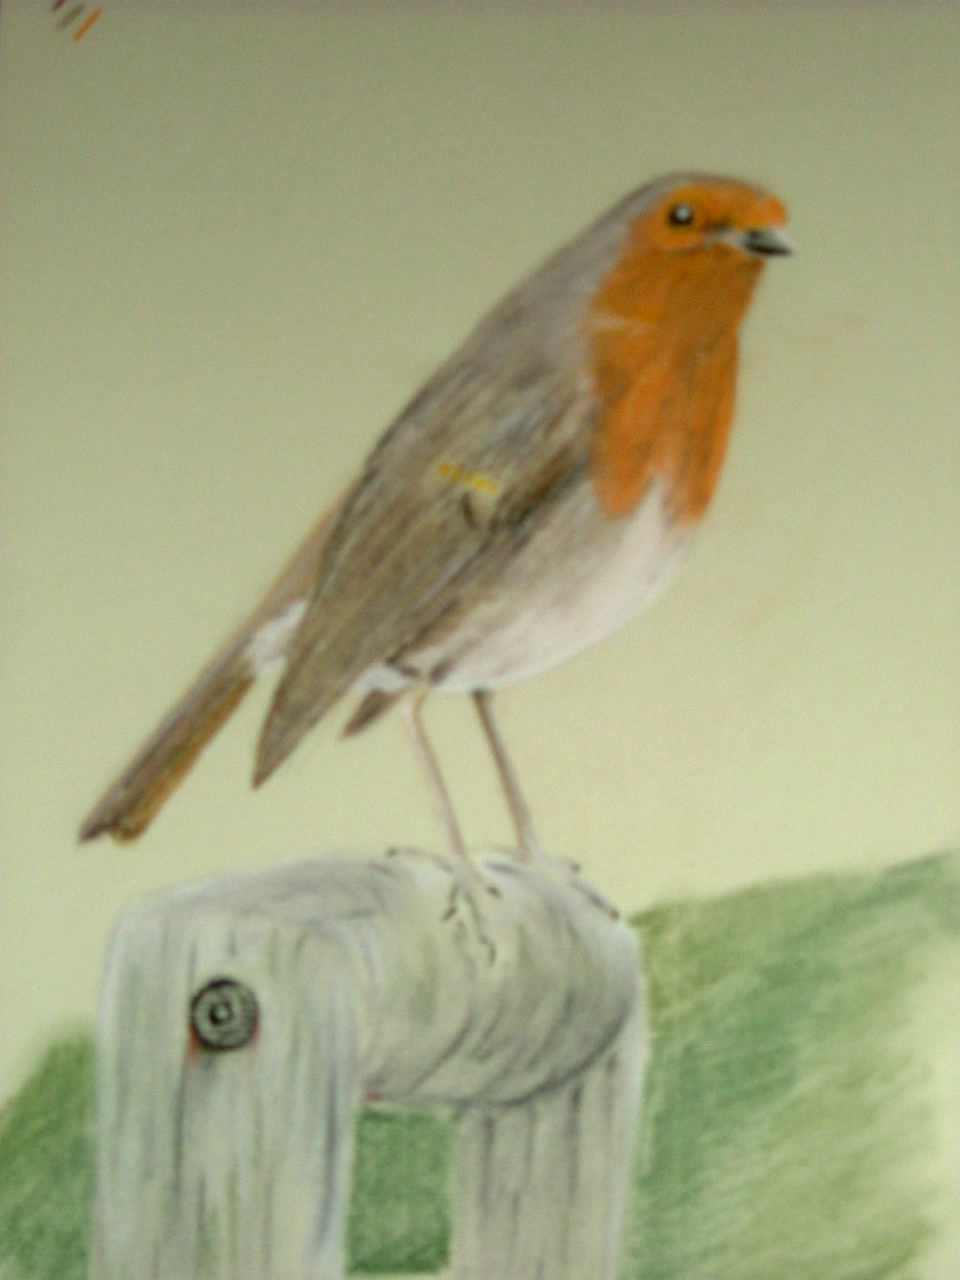 A new Bird Painting by Neil Wilkinson